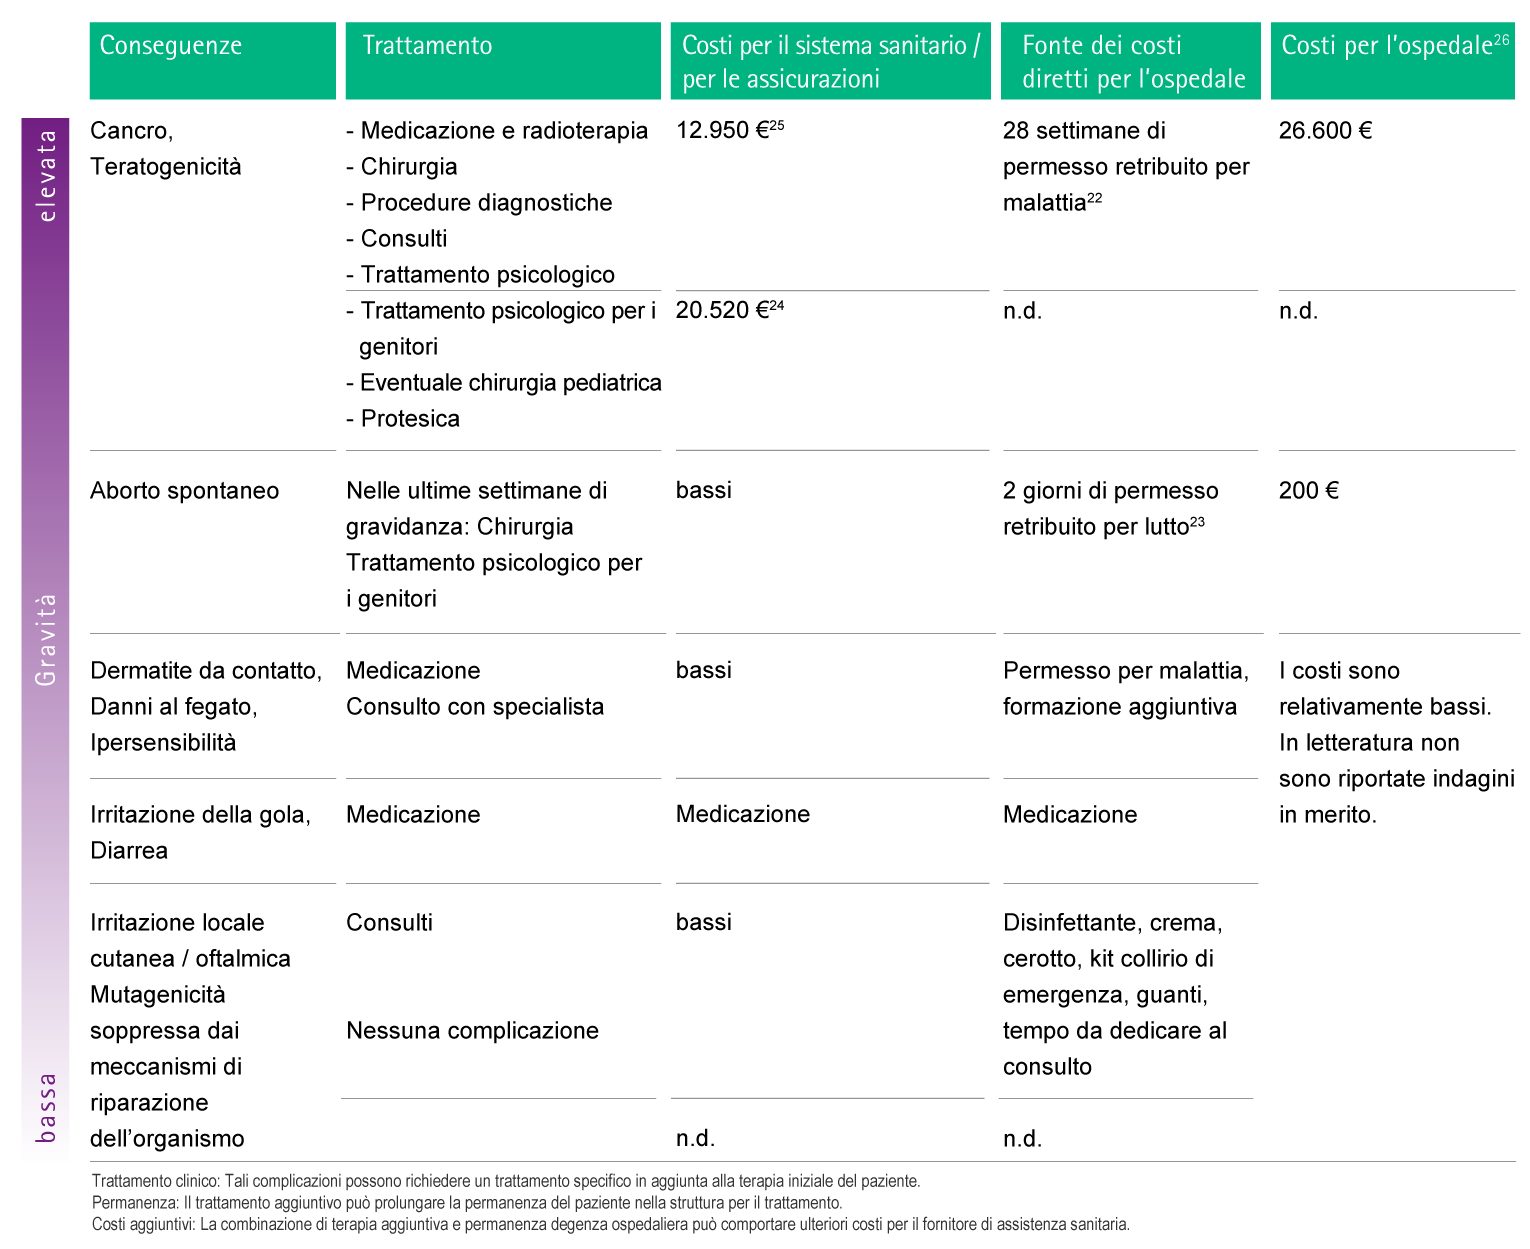 Table with estimations of possible additional costs as a consequence of complications caused by chemical contamination.